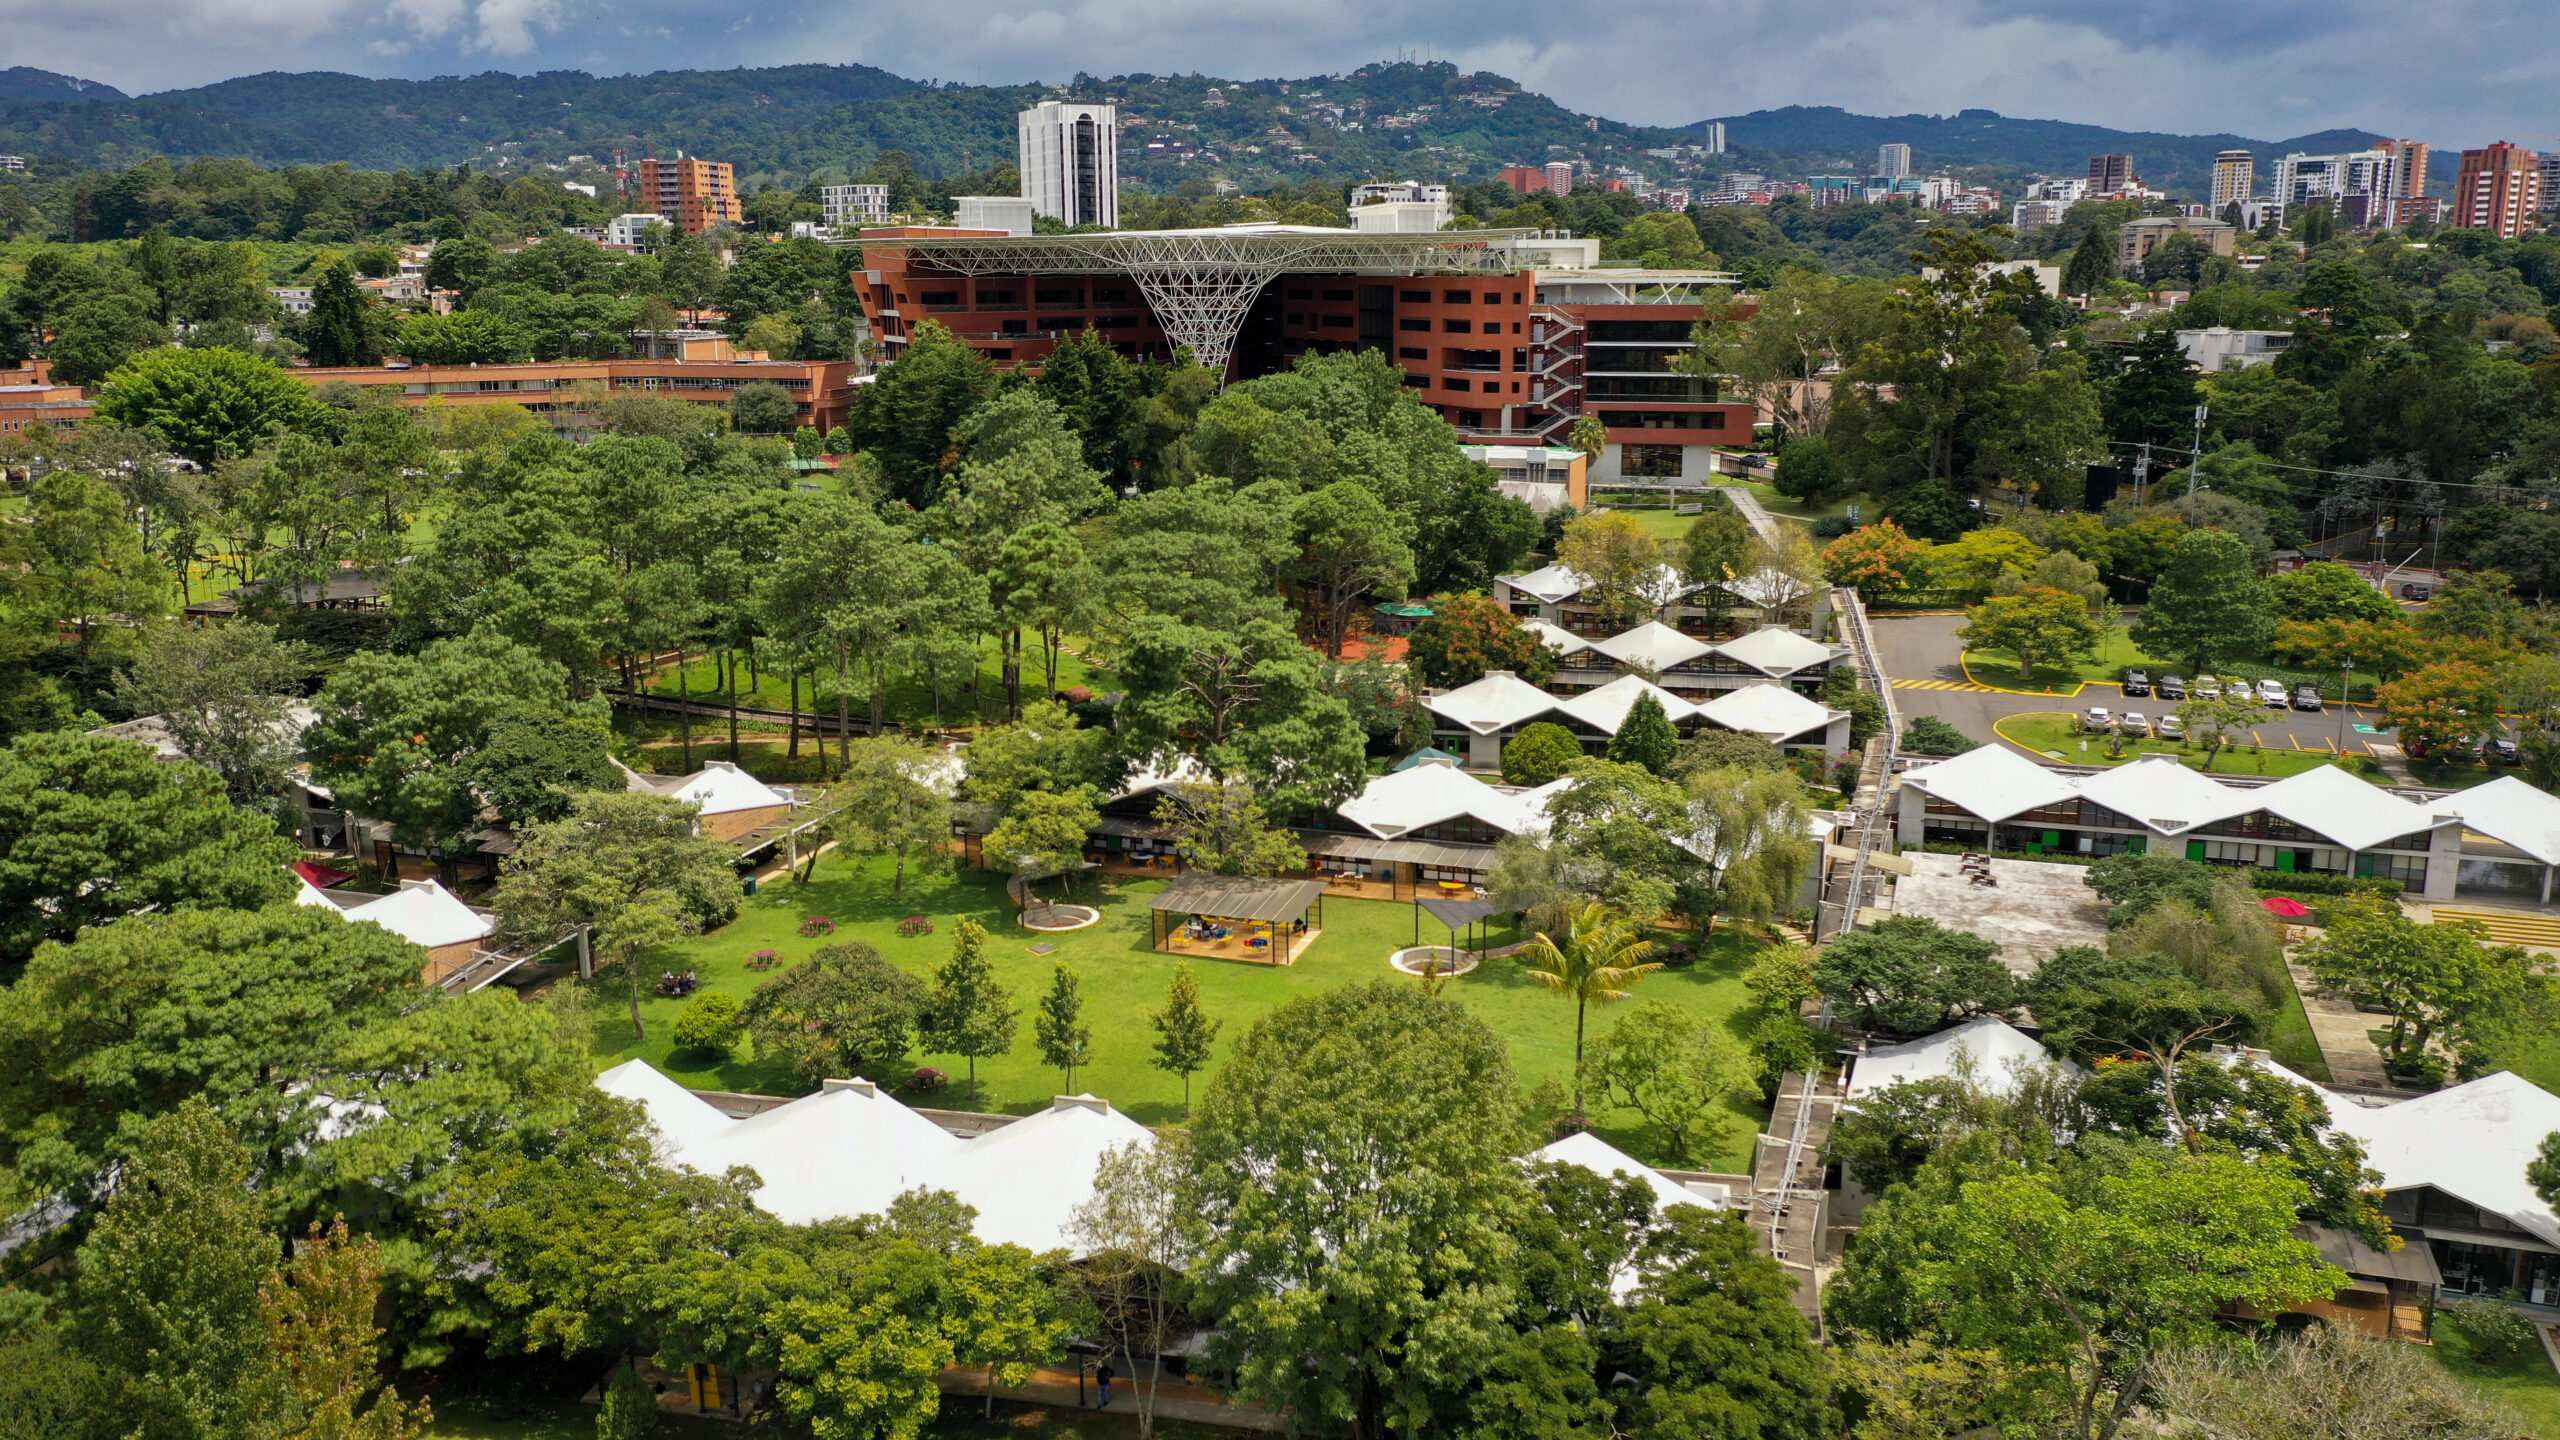 American School of Guatemala building surrounded by greenery